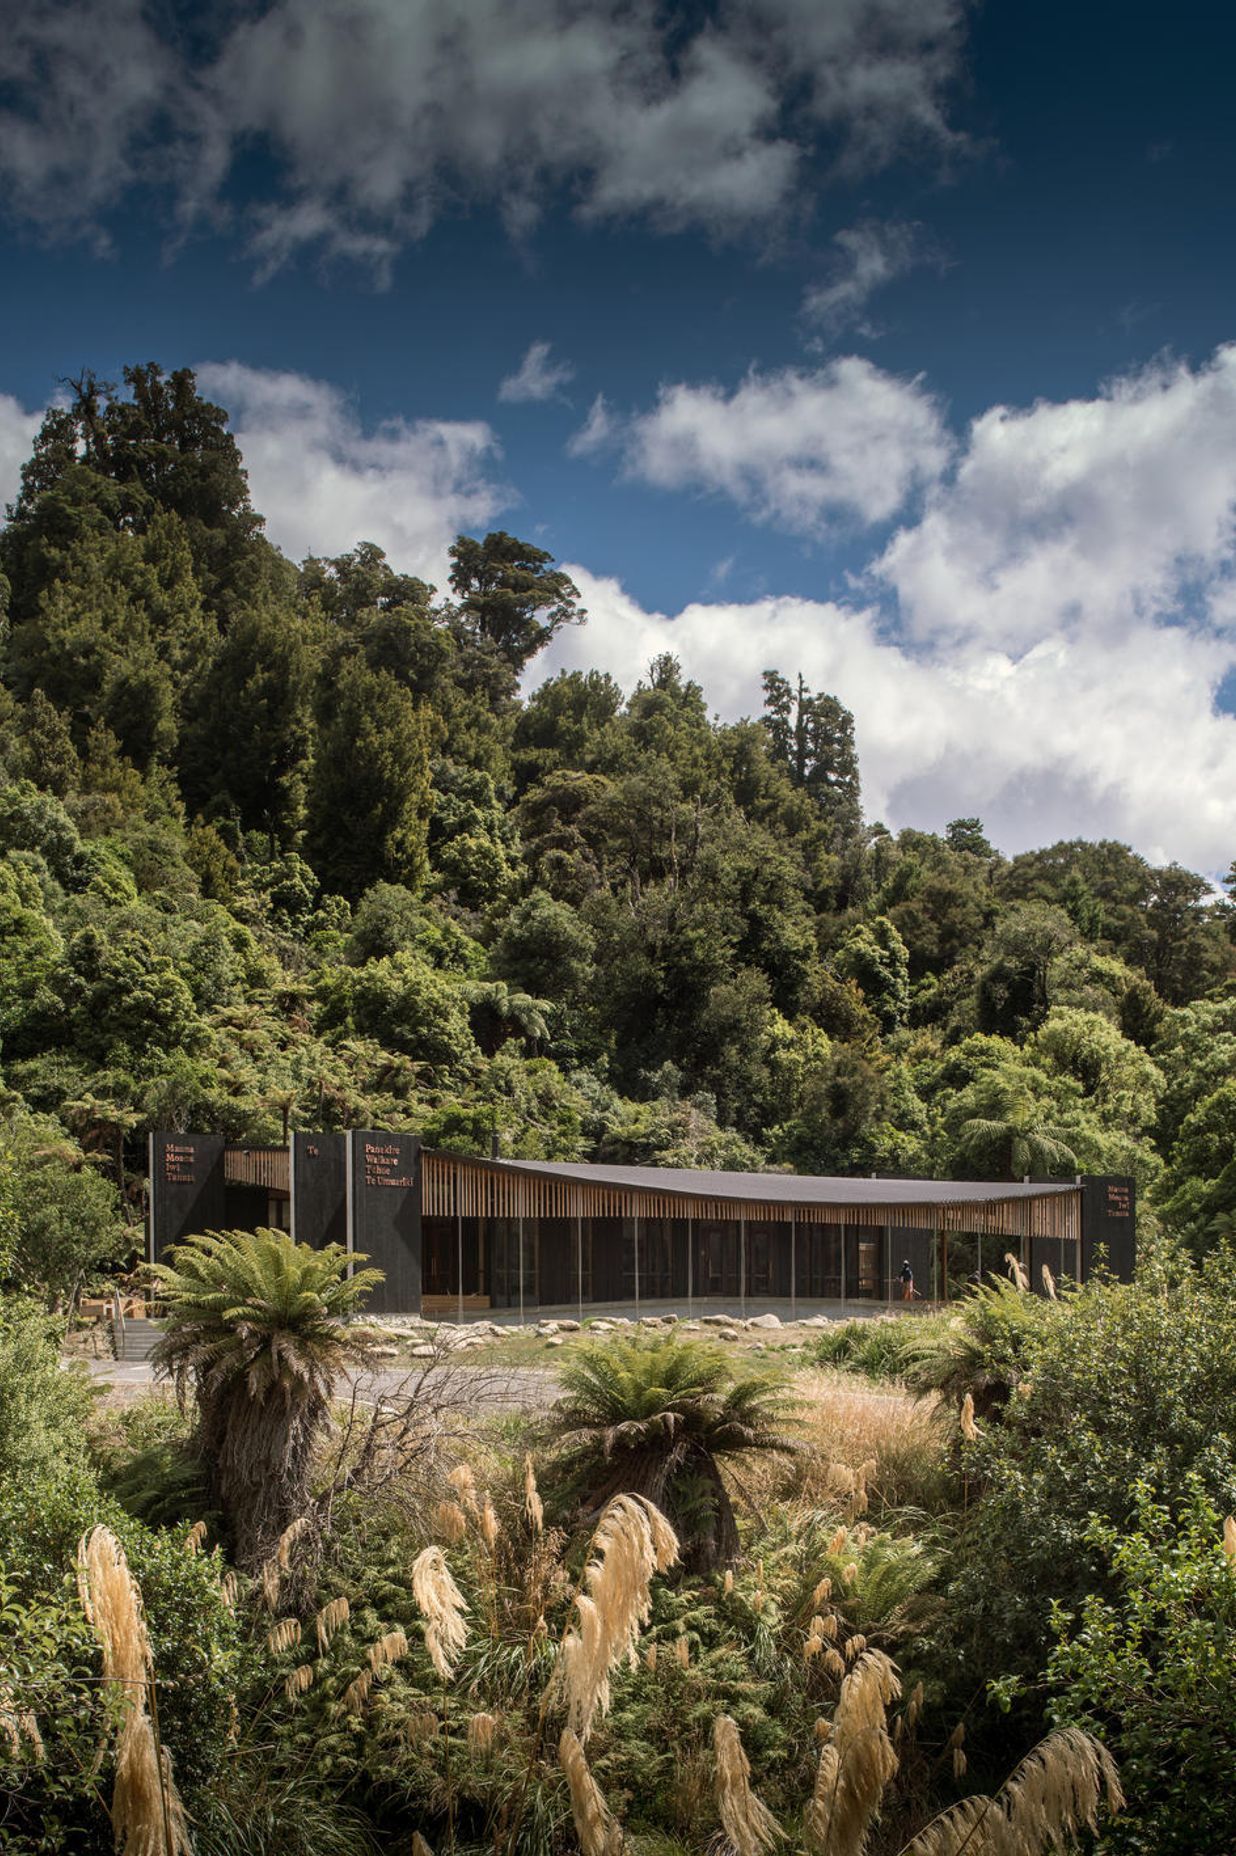 In 2017, Tennent Brown Architects won the national architecture award for Te Wharehou o Waikaremoana visitor centre in Te Urewera forest. 